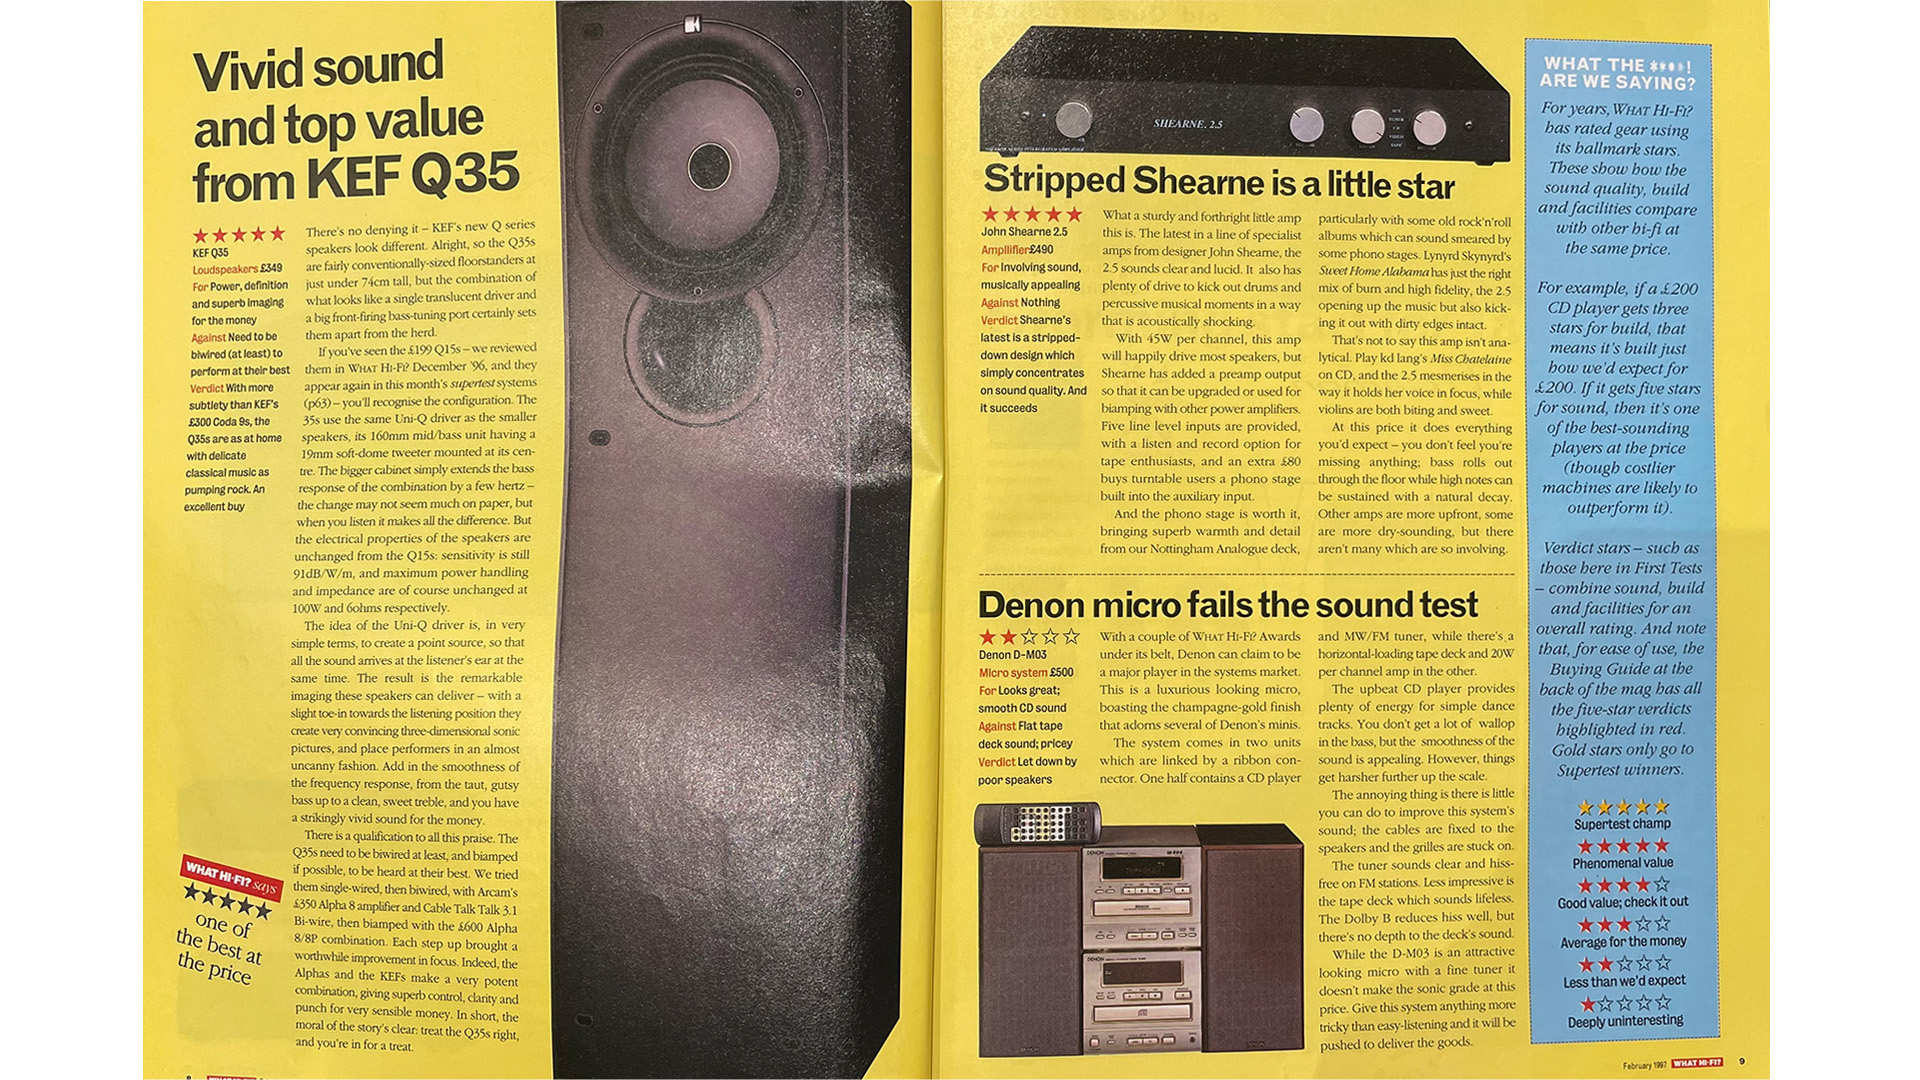 Denon micro system&#8217;s two-star beginnings to five-star triumph: What Hi-Fi? magazine, February 1997